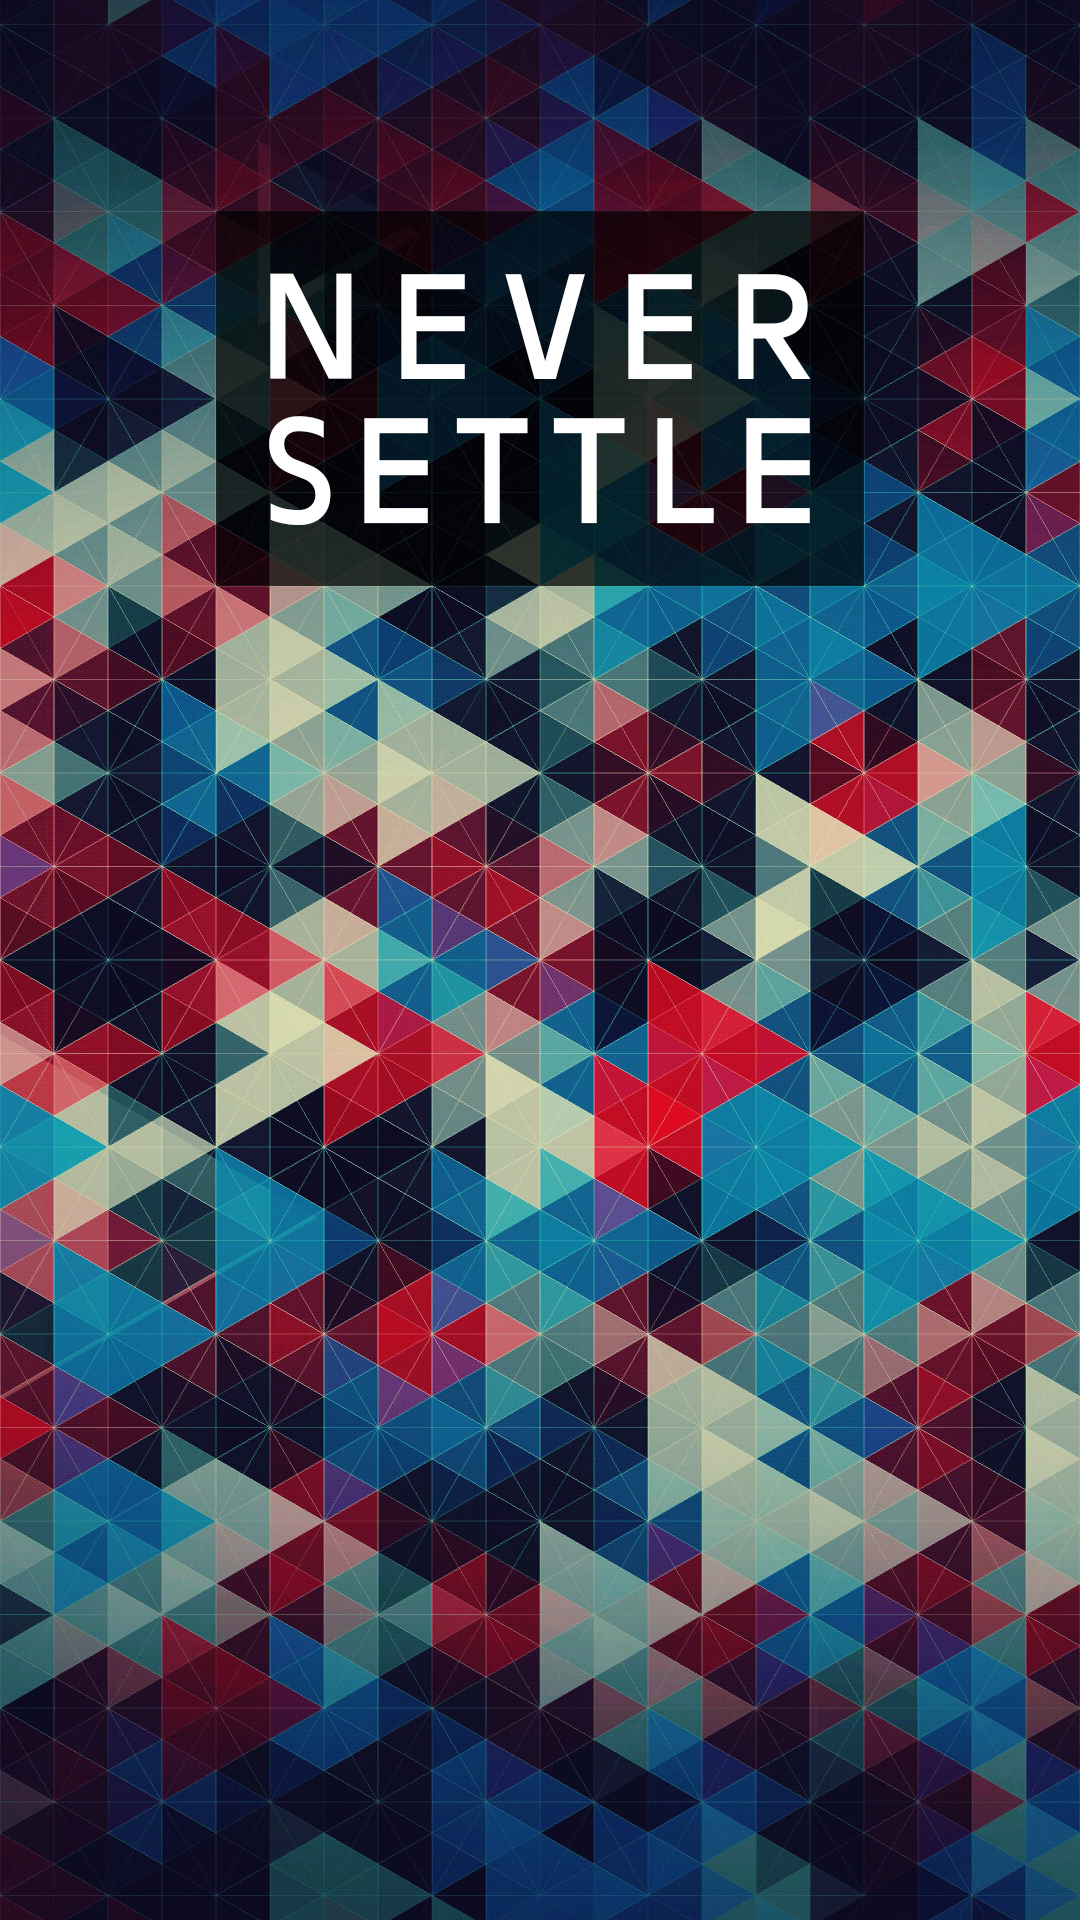 oneplus one wallpaper 1080p,pattern,text,textile,book cover,design